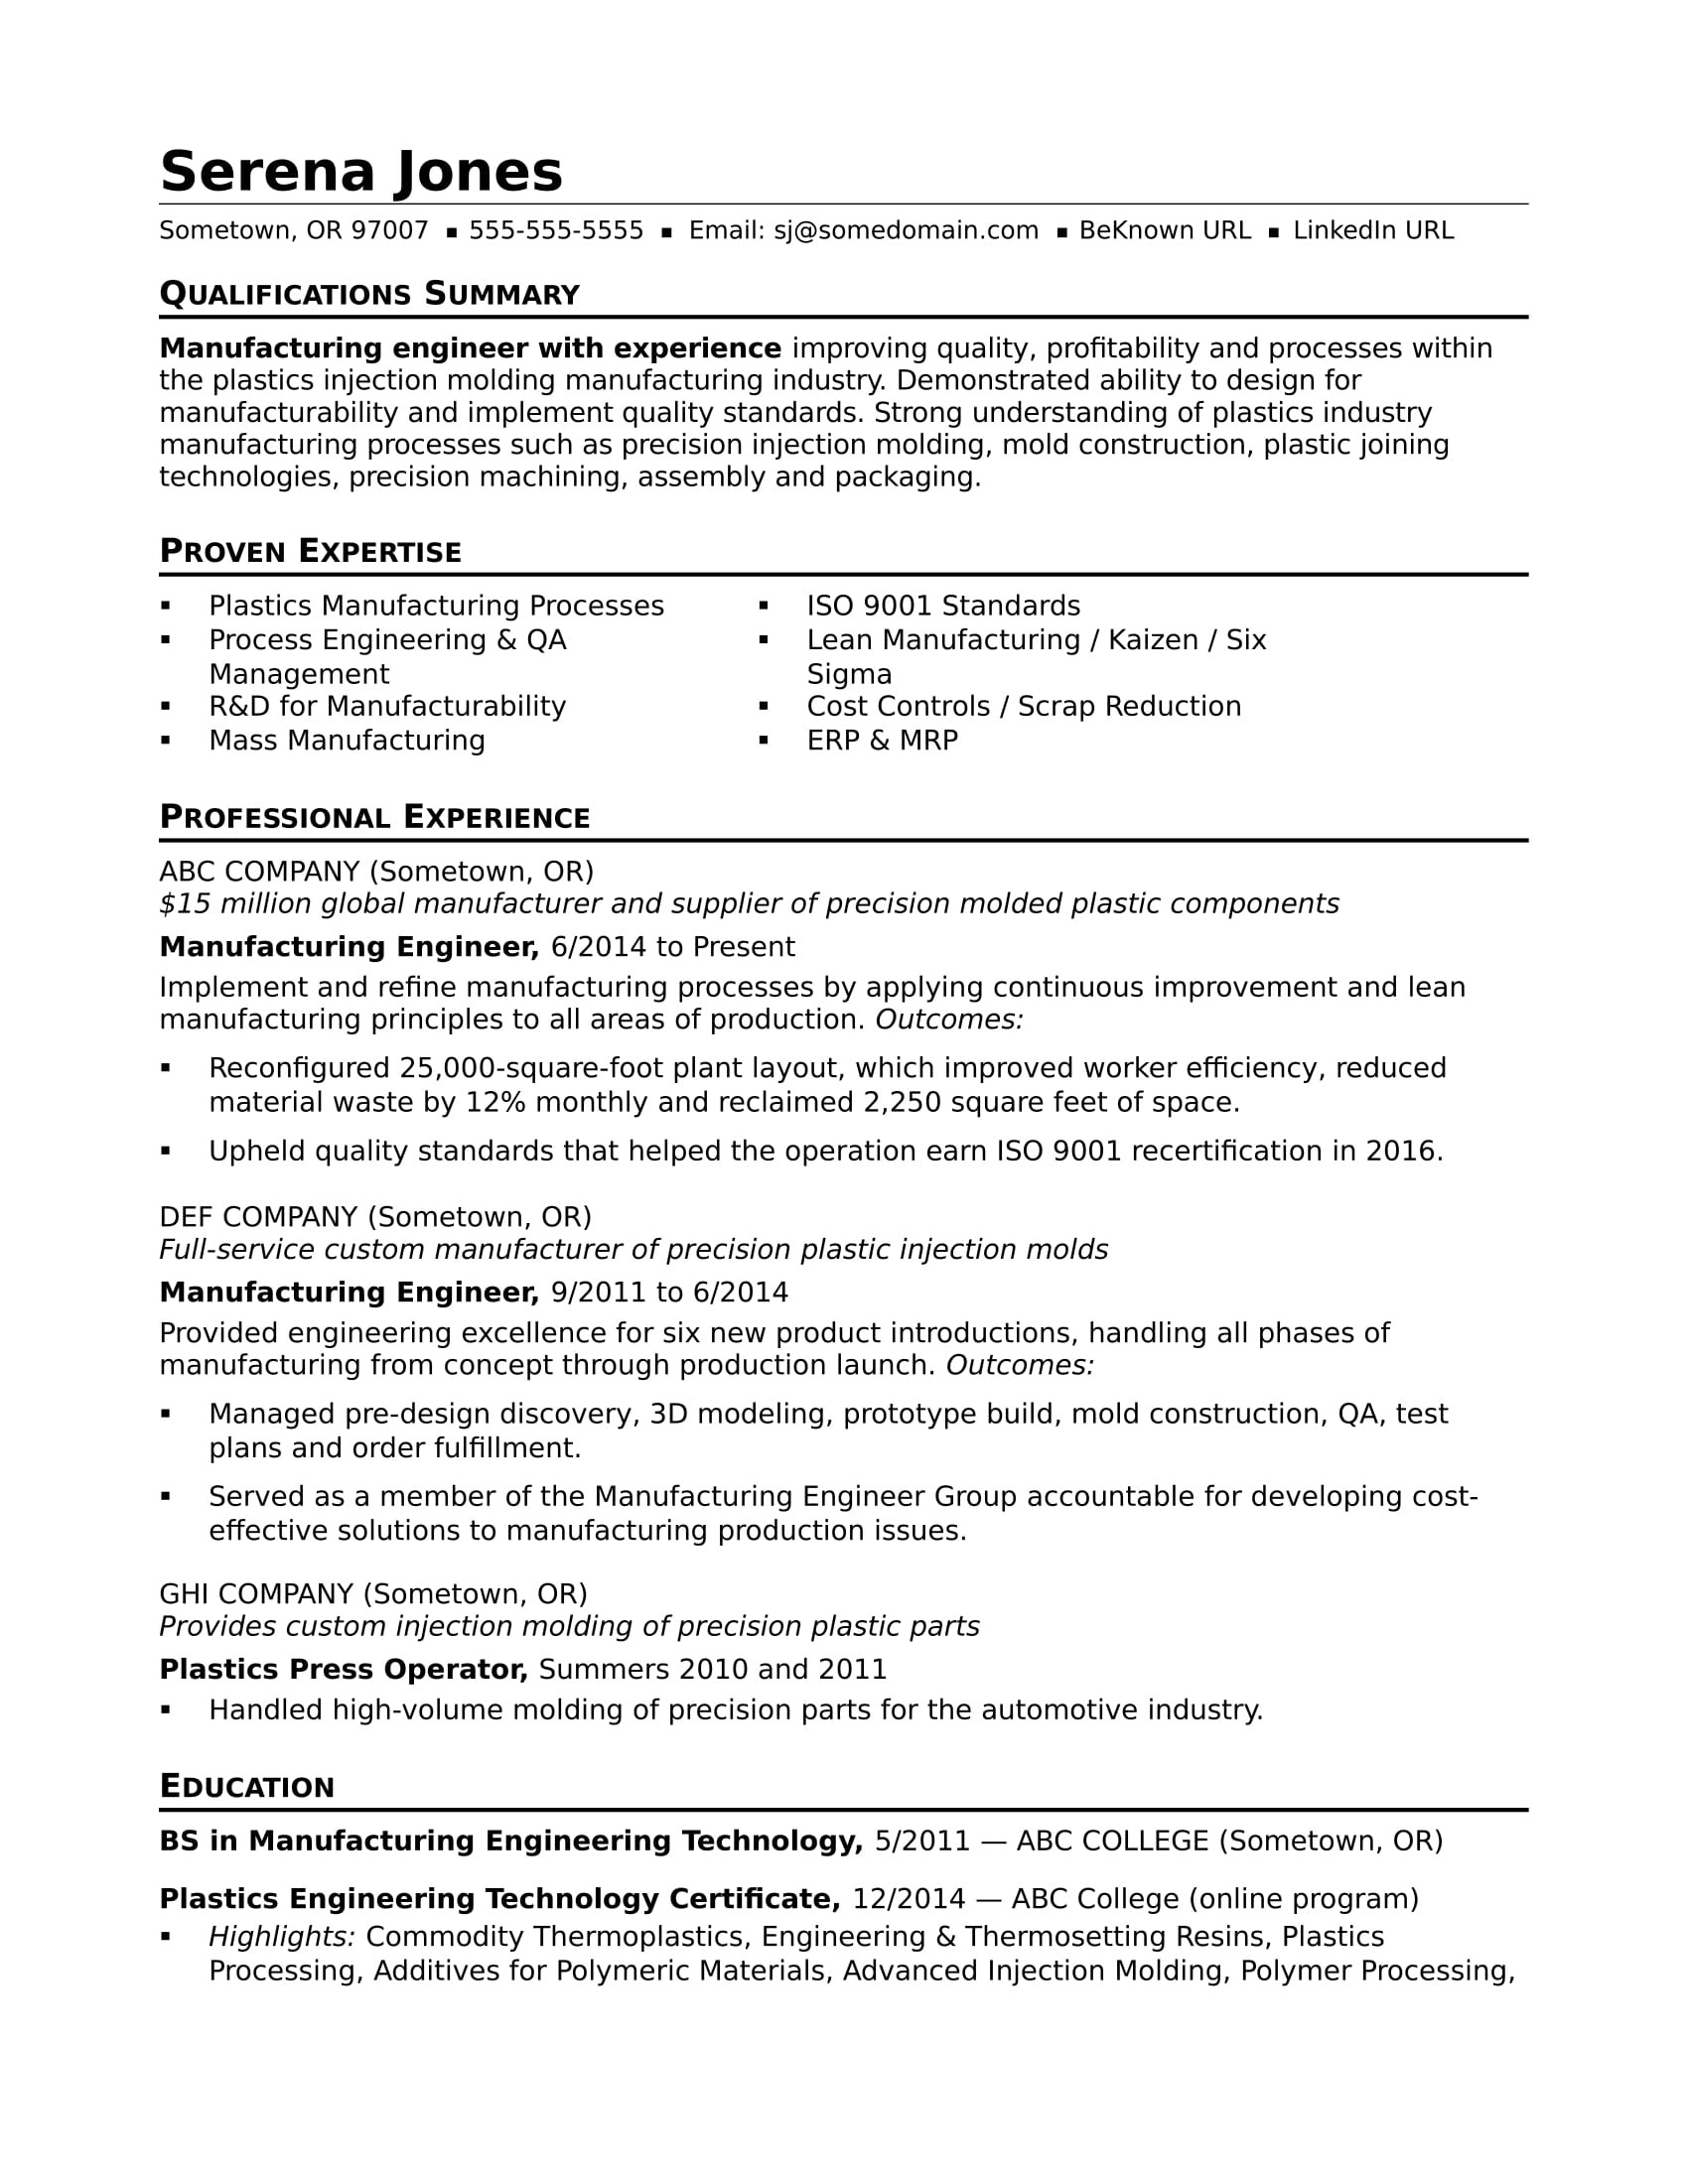 Sample Resumes for New Product Development Engineer Manufacturing Engineer Resume Sample Monster.com